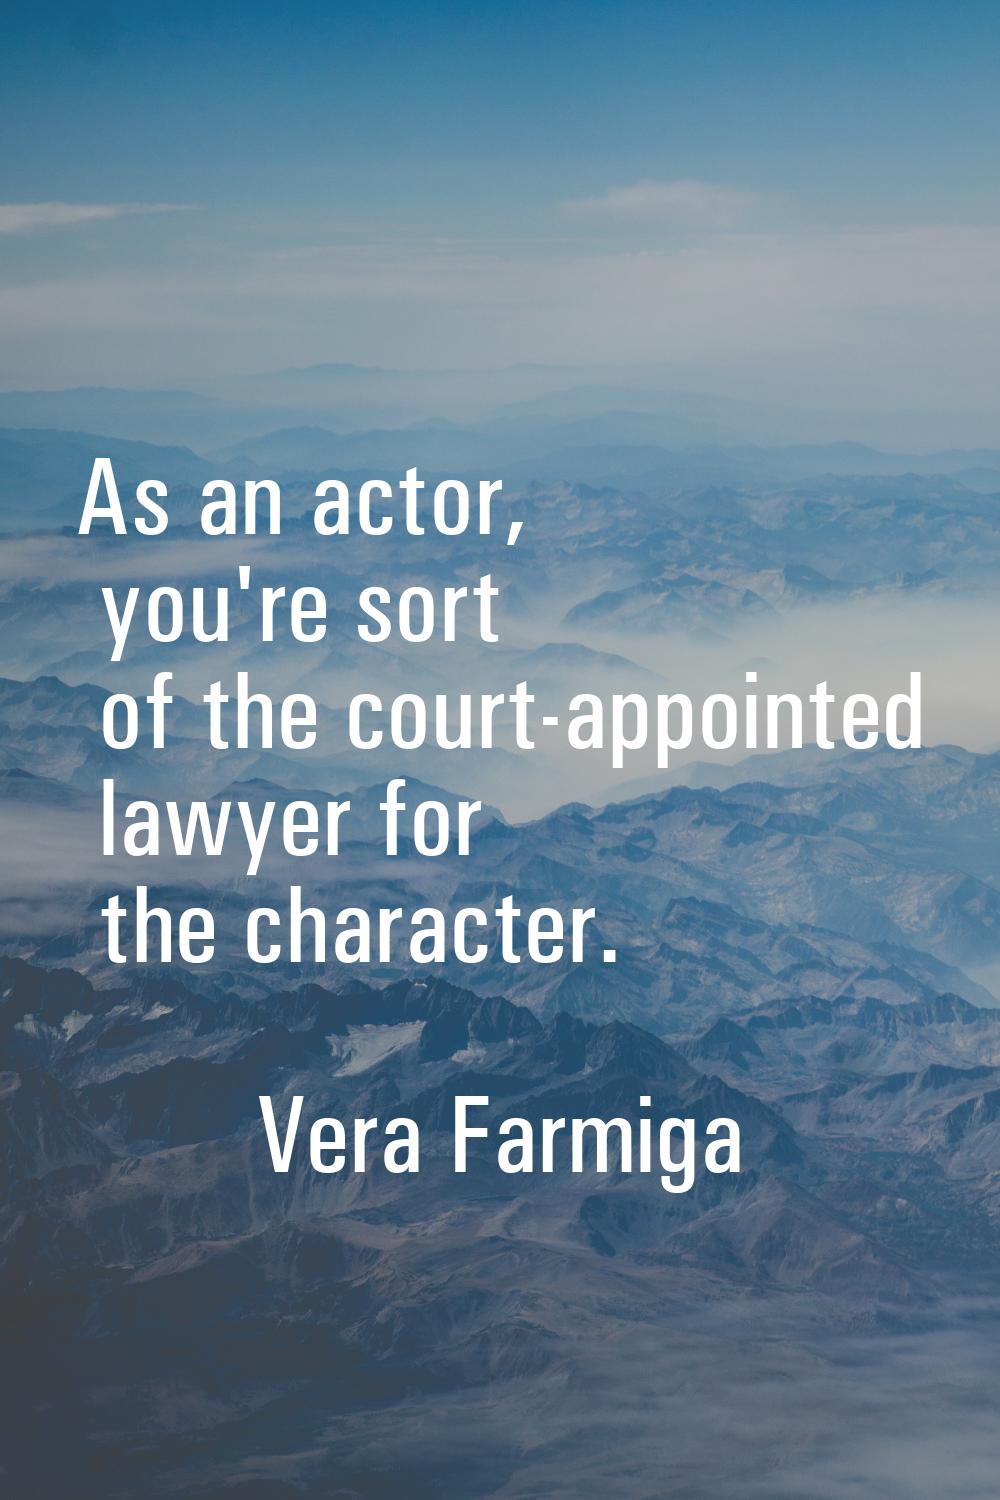 As an actor, you're sort of the court-appointed lawyer for the character.